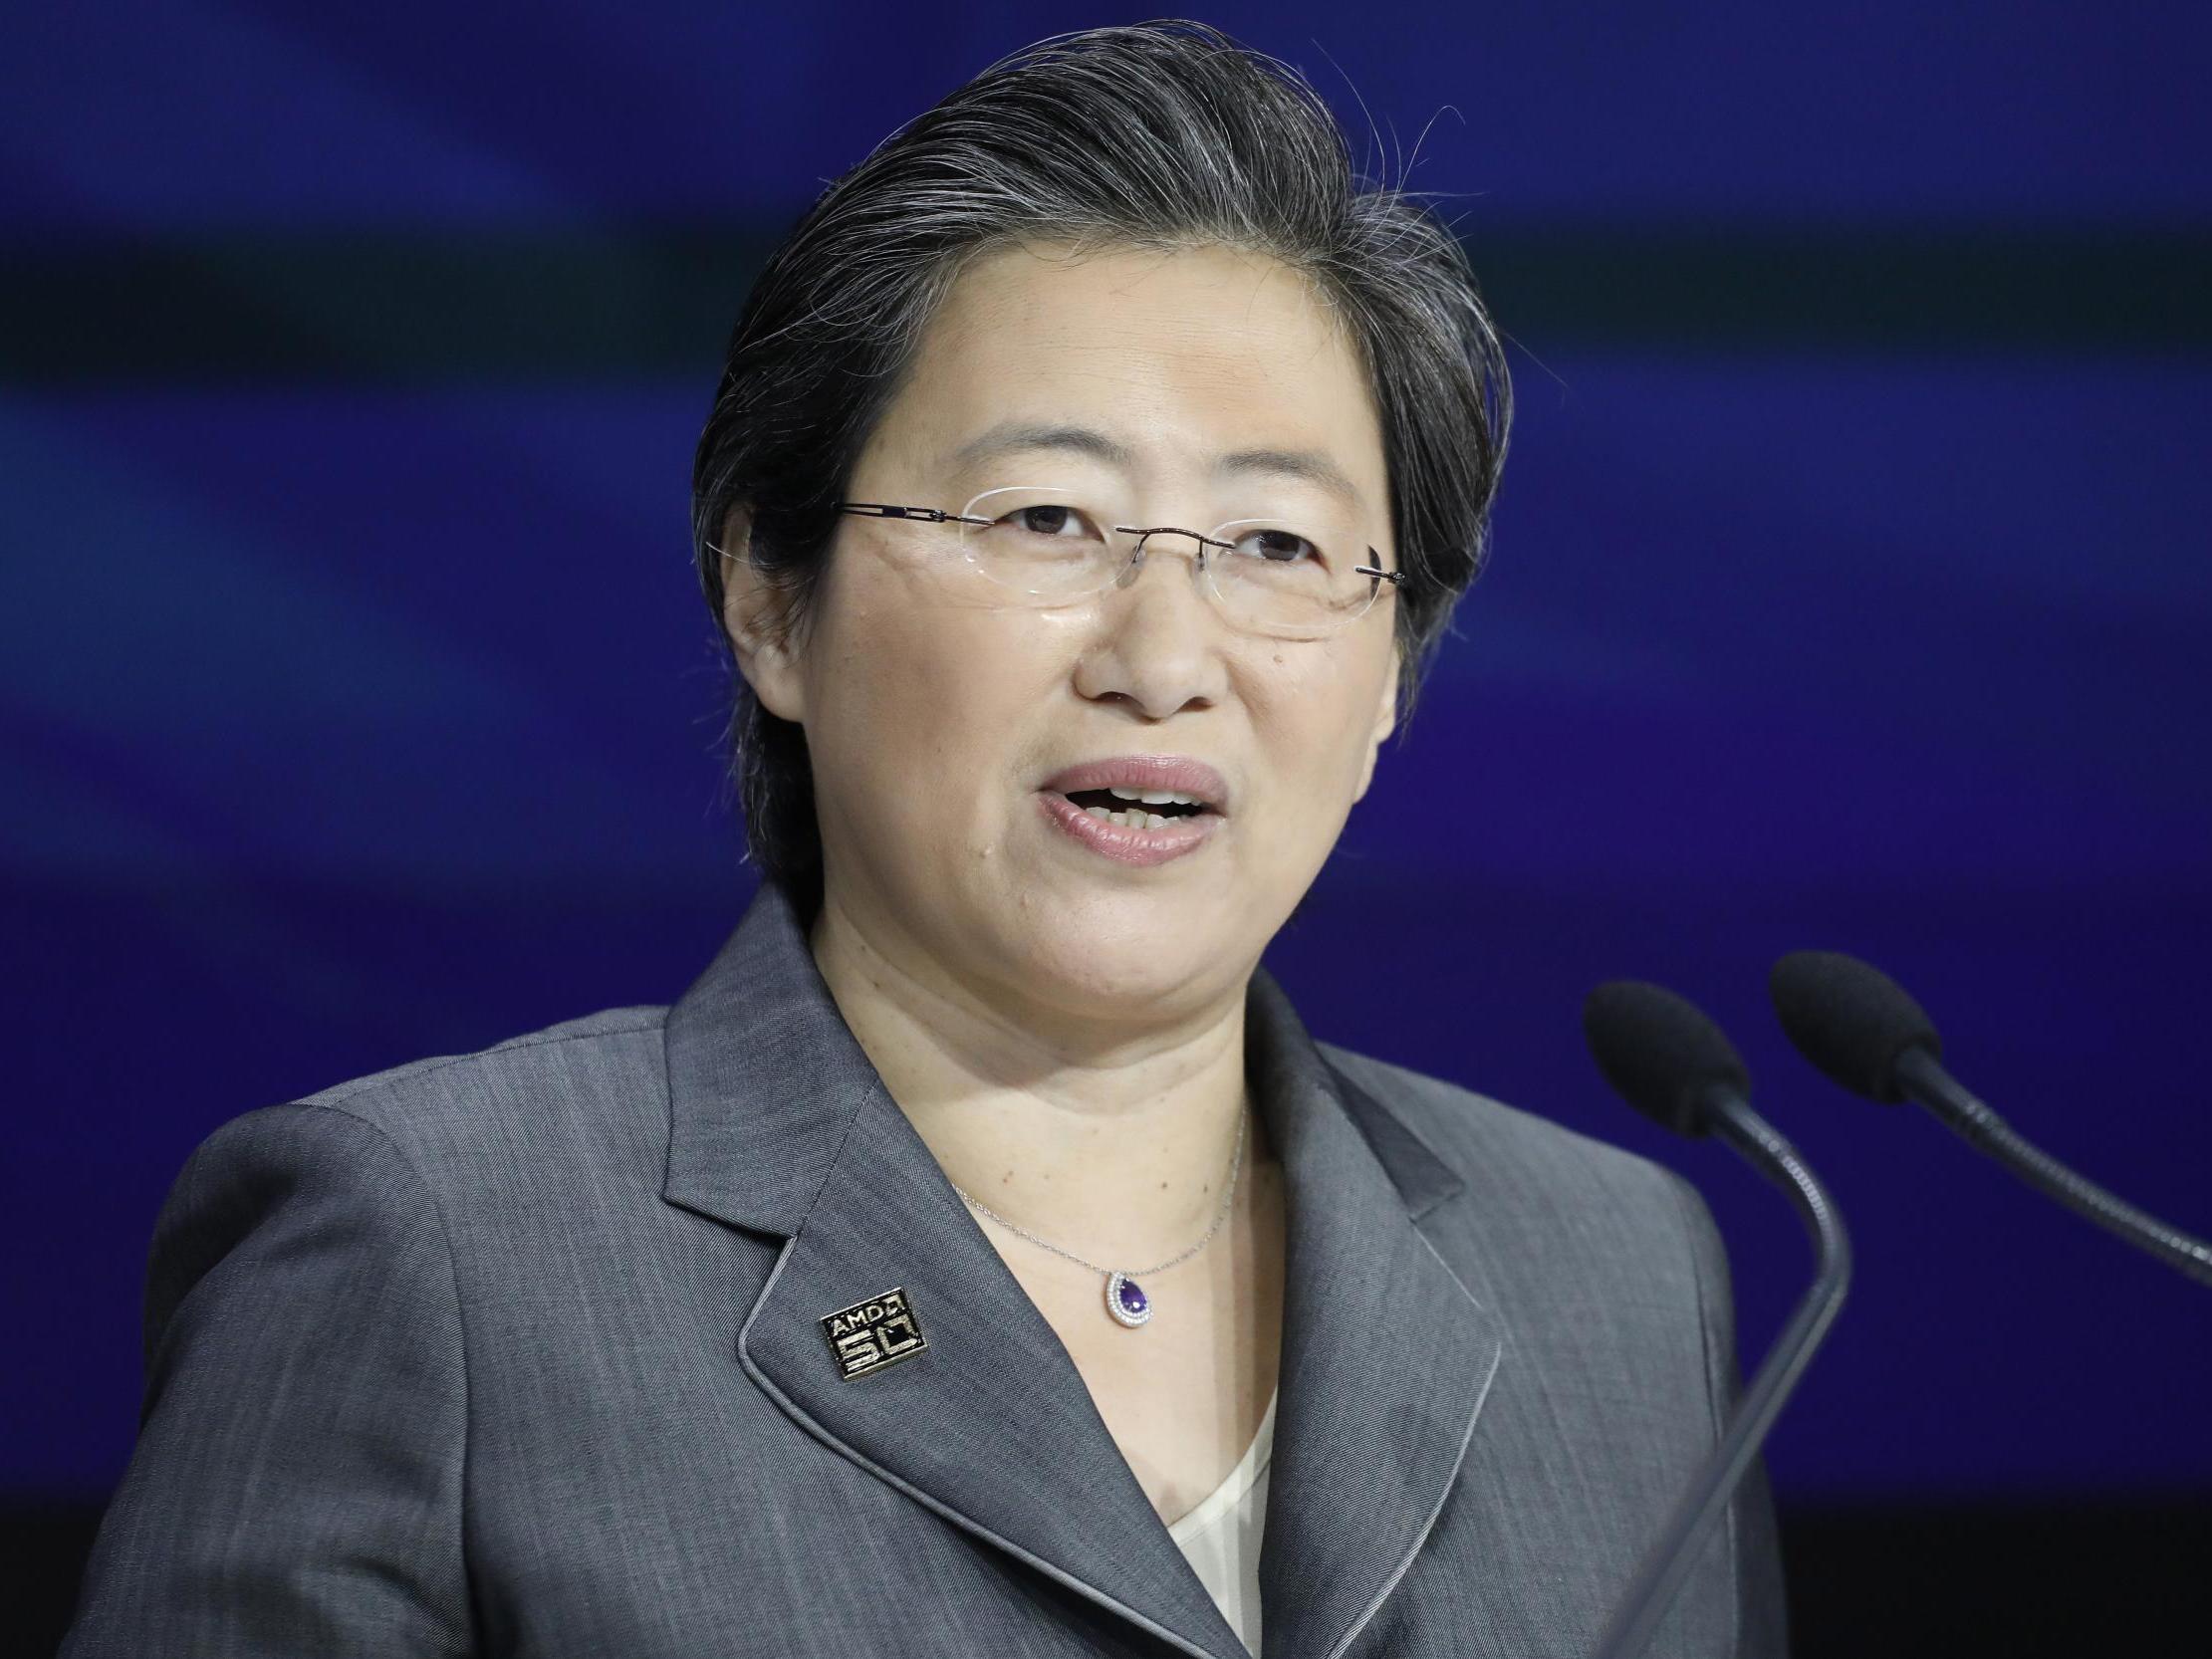 Lisa Su: CEO becomes first woman ever to top Associated Press pay survey |  The Independent | The Independent